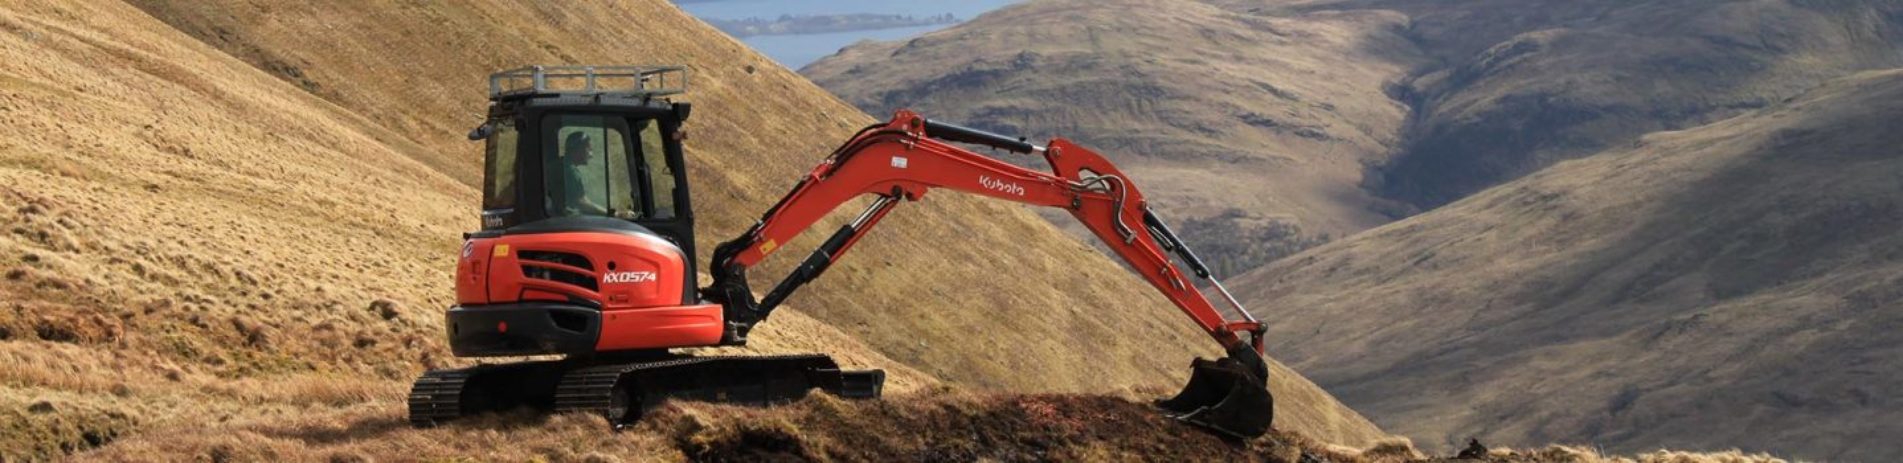 red-excavator-of-peatland-on-brown-hills-with-loch-lomond-just-visible-in-the-background